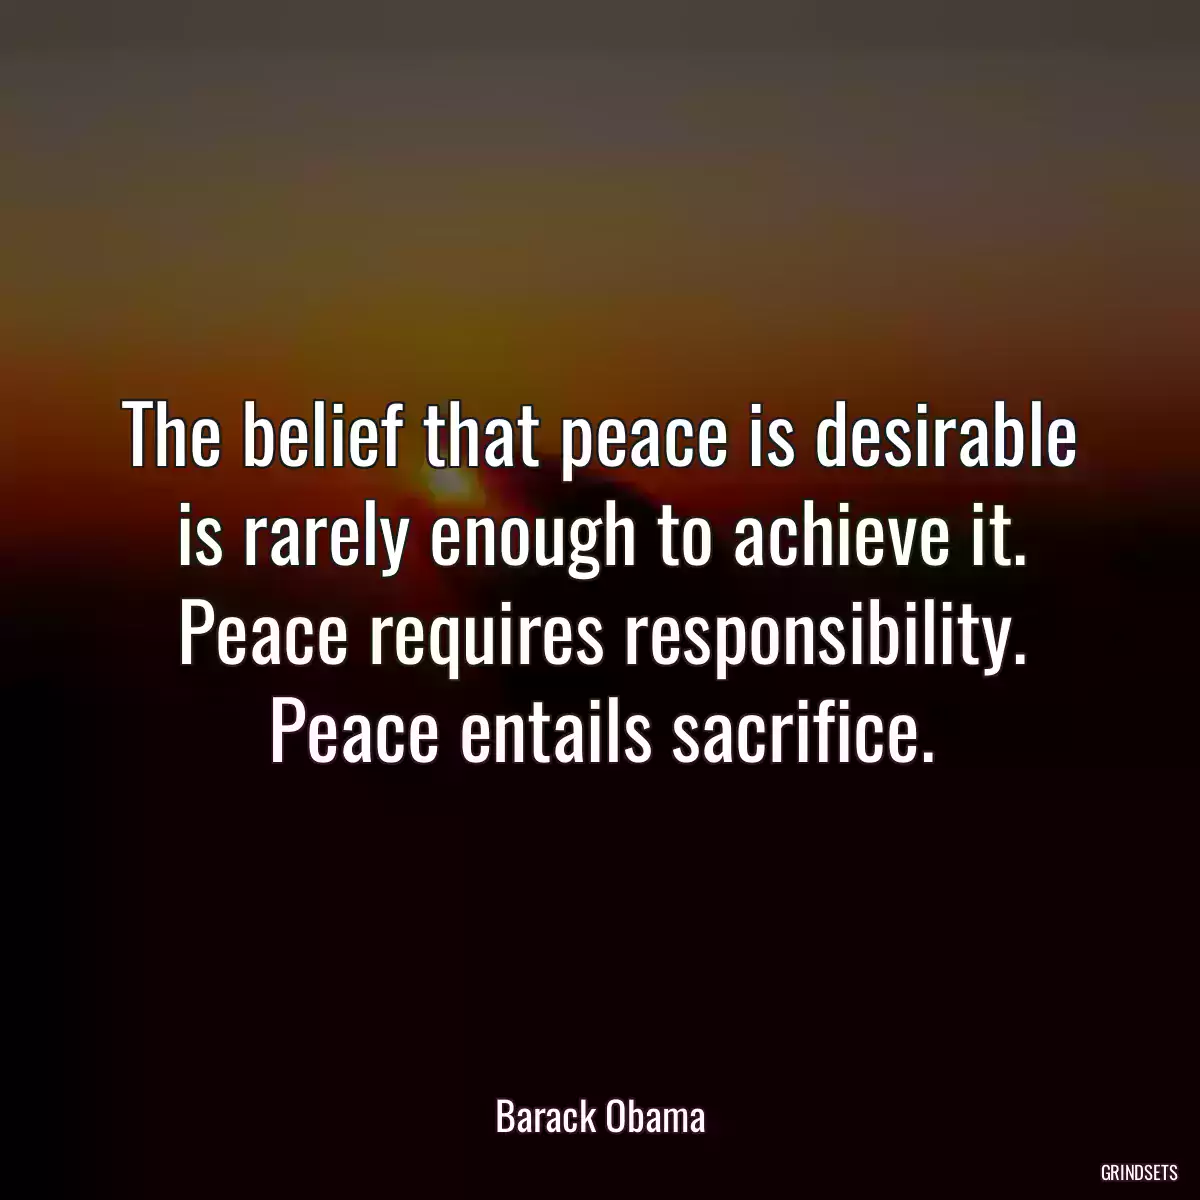 The belief that peace is desirable is rarely enough to achieve it. Peace requires responsibility. Peace entails sacrifice.